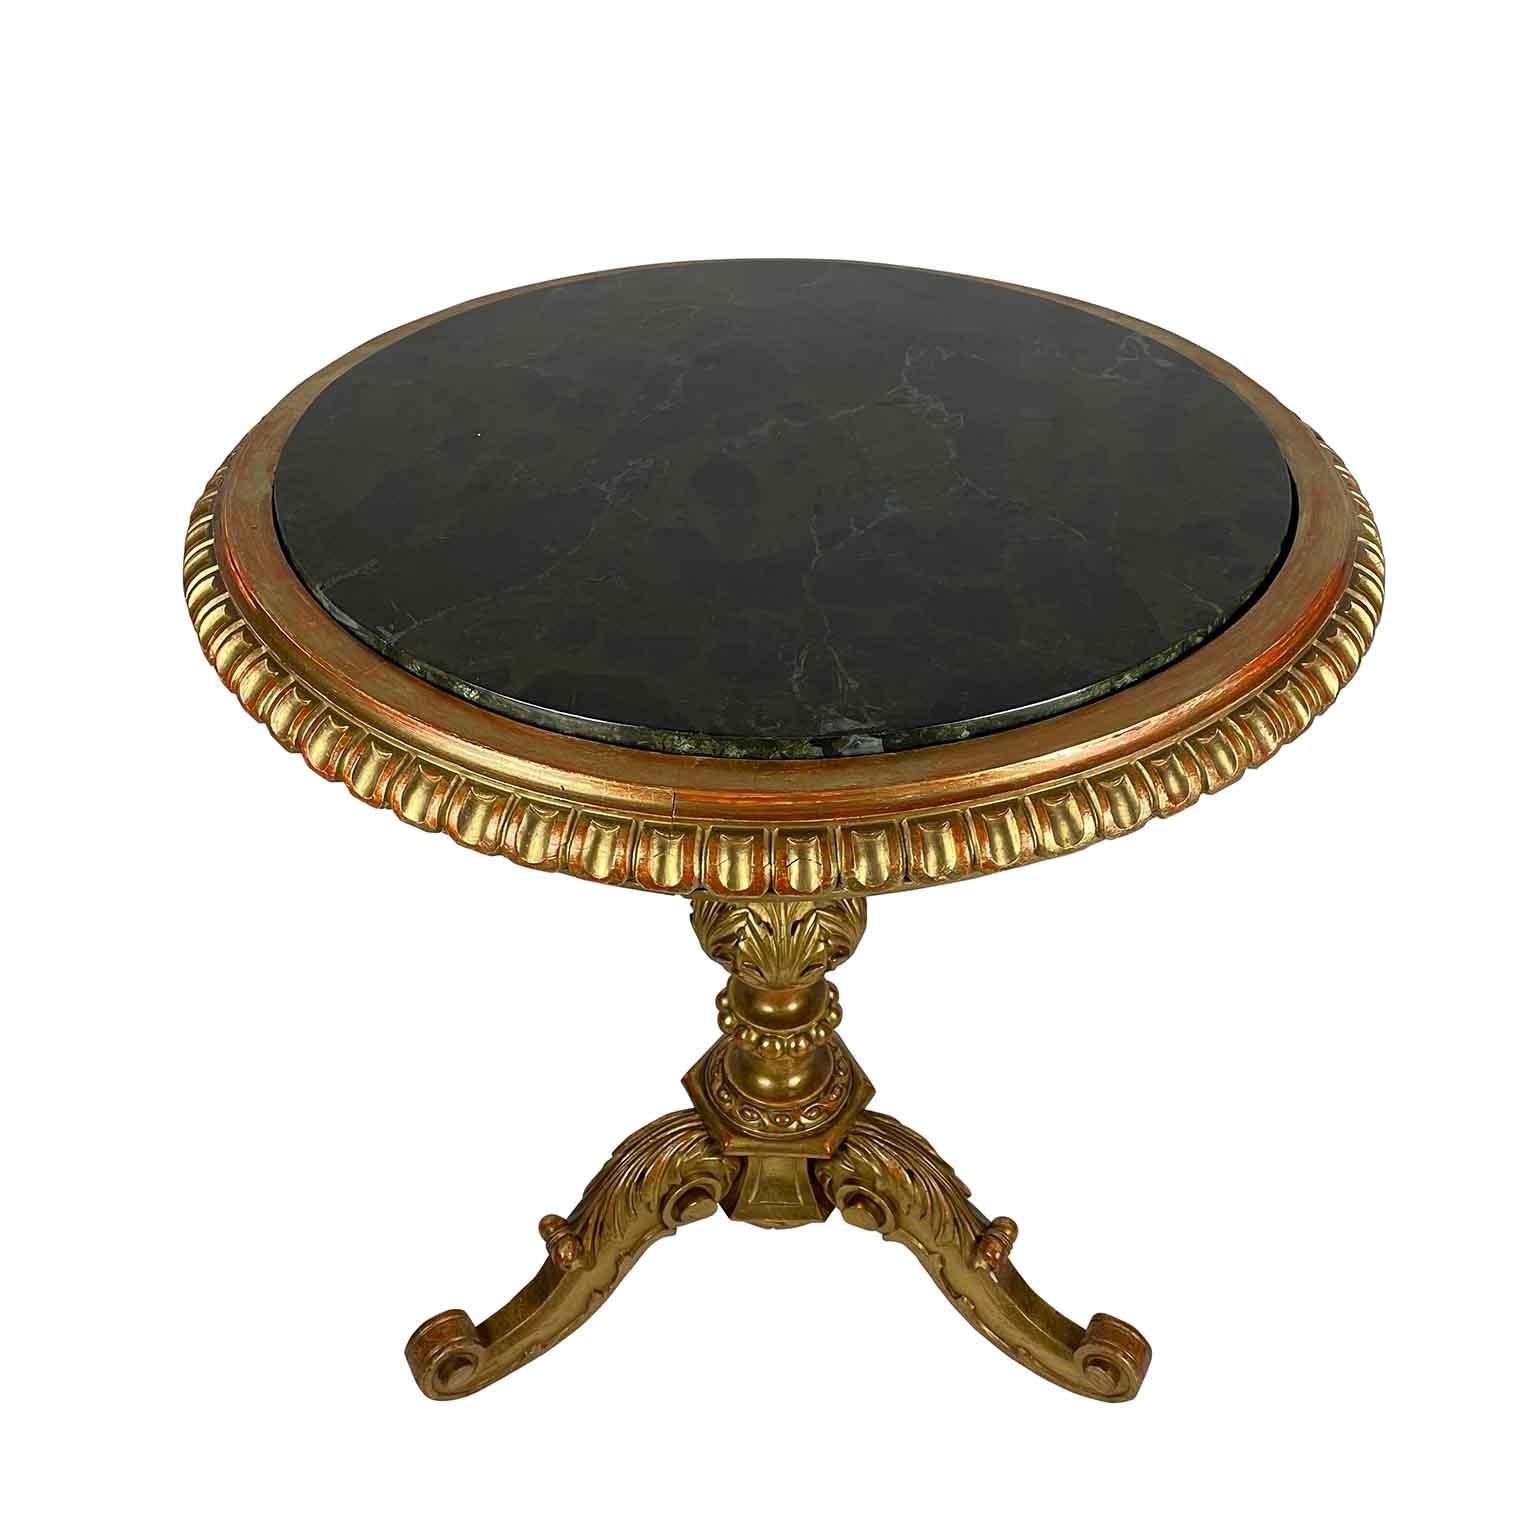 Italian carved giltwood  gueridon from Tuscany dating back to 19th  century, beautiful gold leaf gilding, acanthus leaf design carving, tripod feet and  dark green faux-marble  wooden top.
In good condition with signs of wear and use consistent with